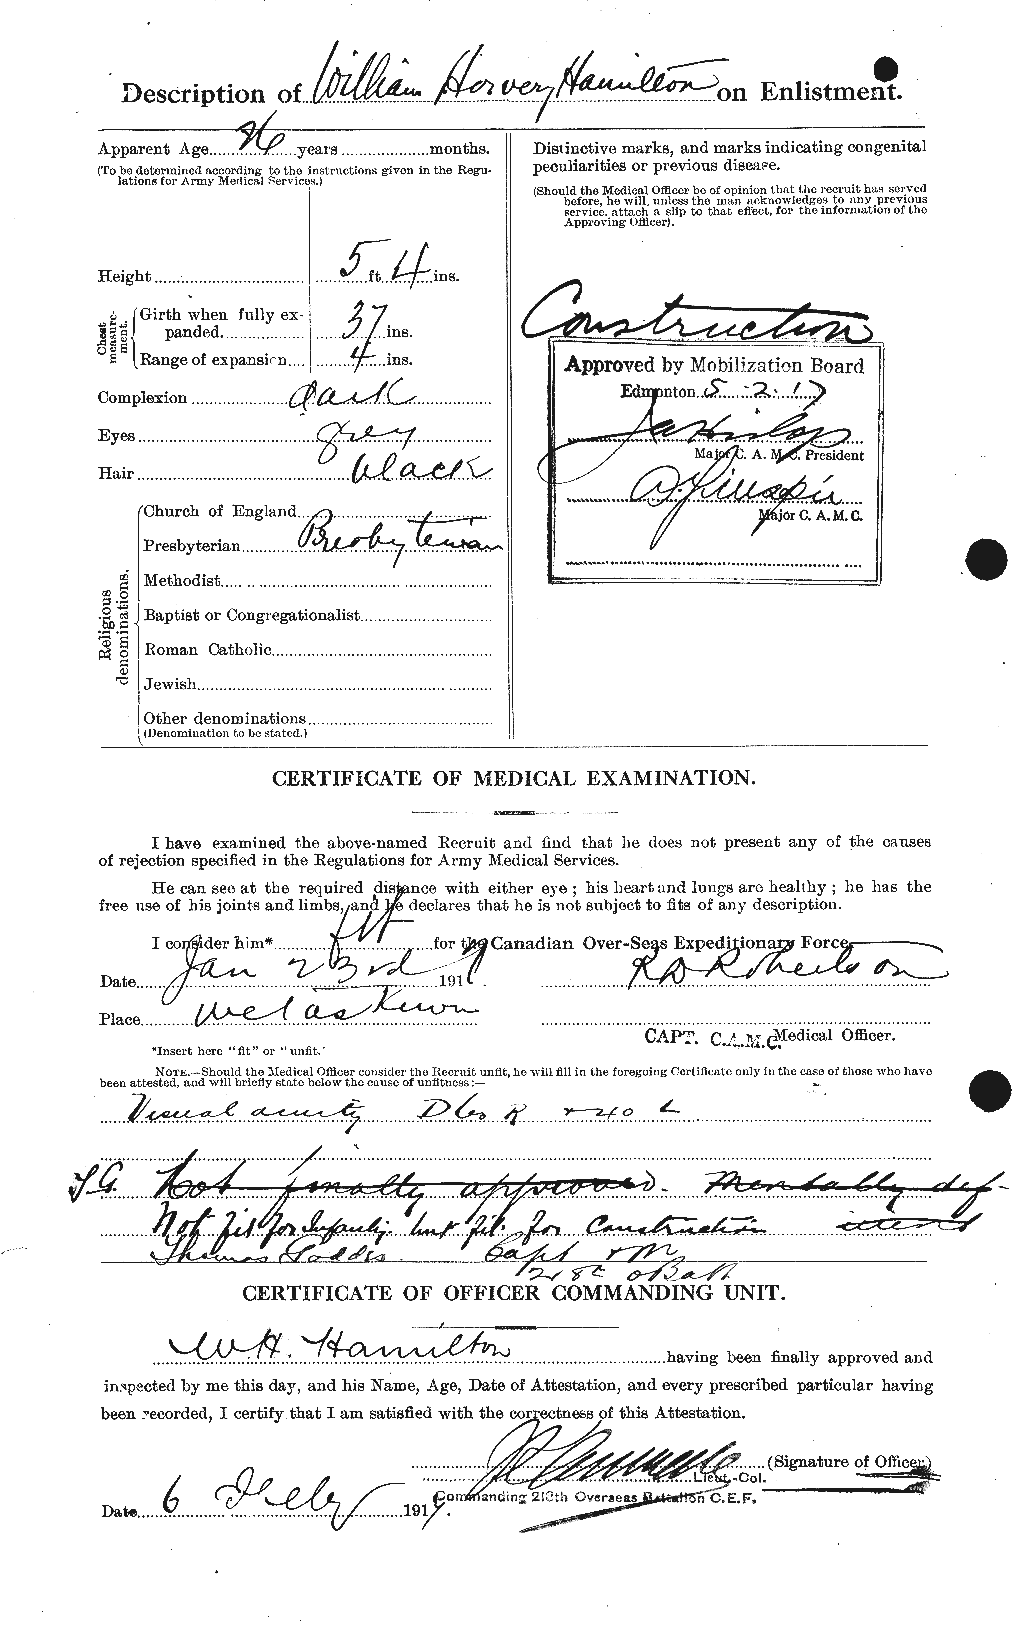 Personnel Records of the First World War - CEF 374897b